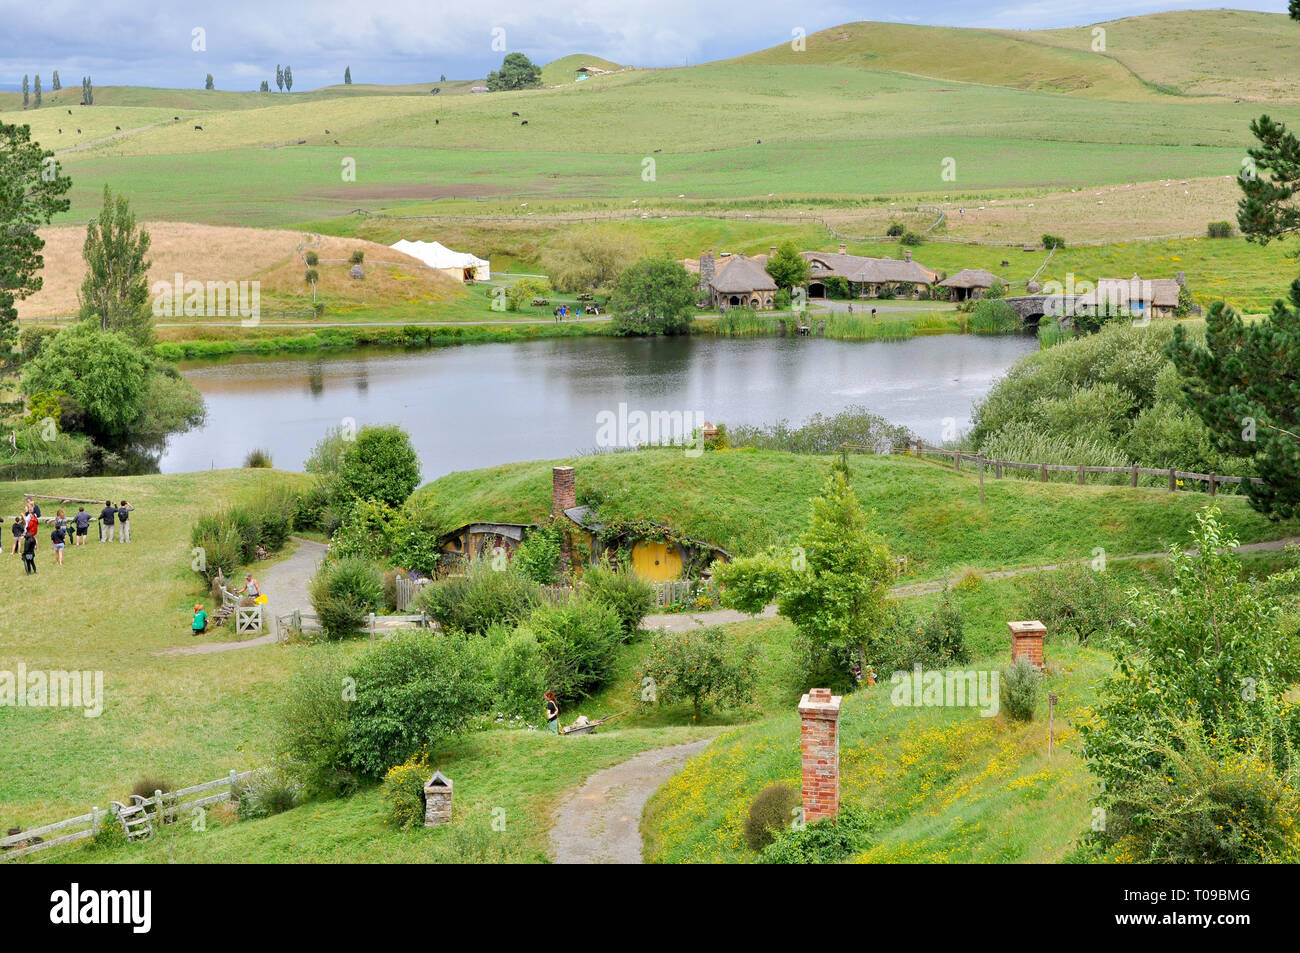 Hobbiton movie set in the Waikato region of New Zealand north island. Rolling hills of The Shire with lake, mill, bridge, Green Dragon Inn. Visitors Stock Photo